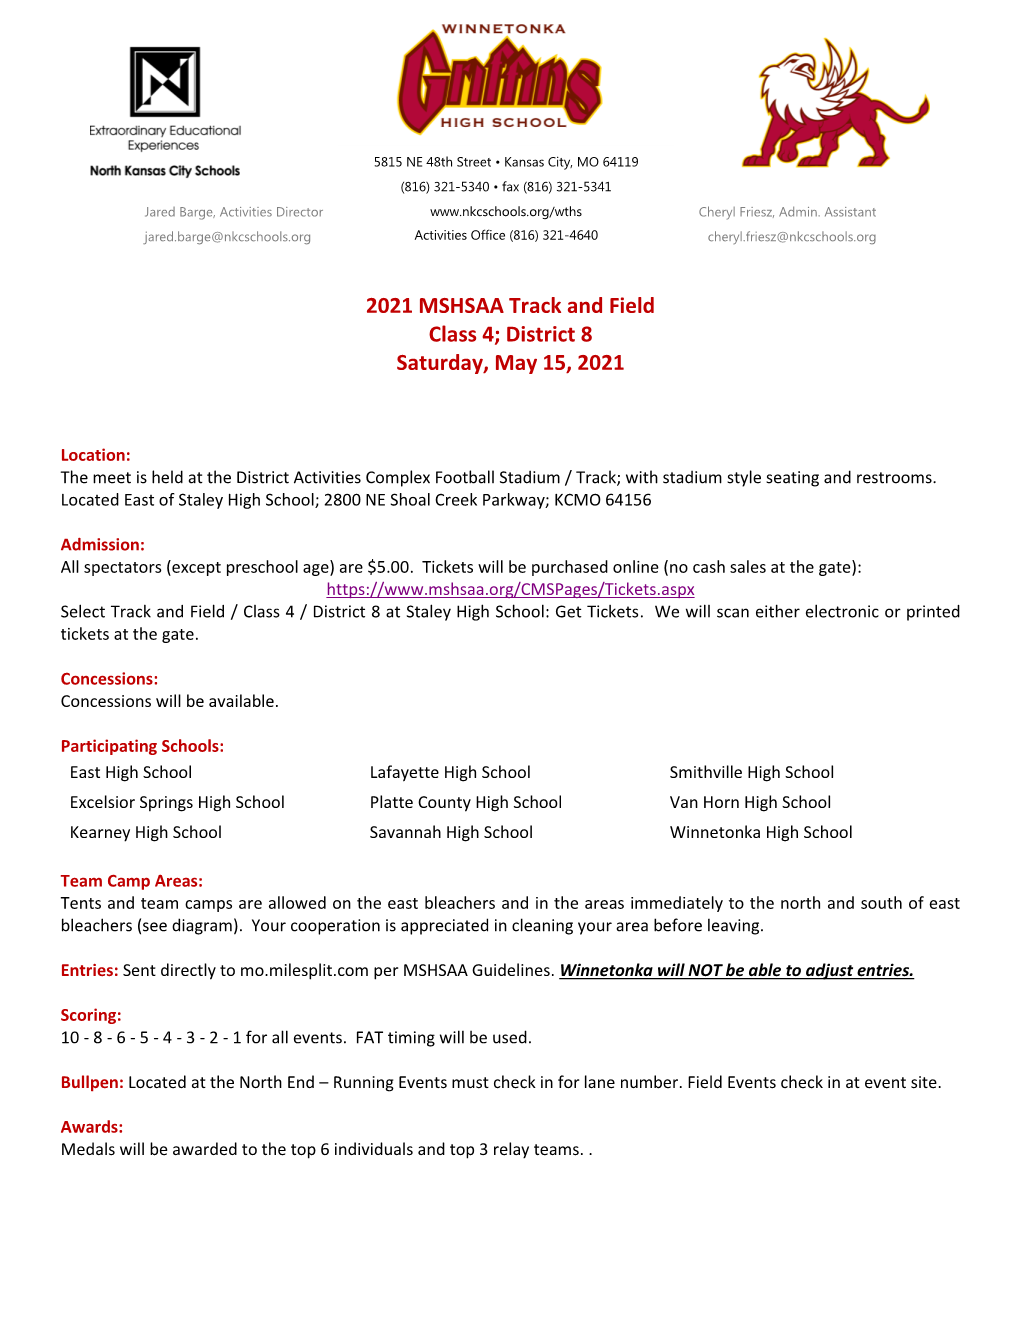 2021 MSHSAA Track and Field Class 4; District 8 Saturday, May 15, 2021